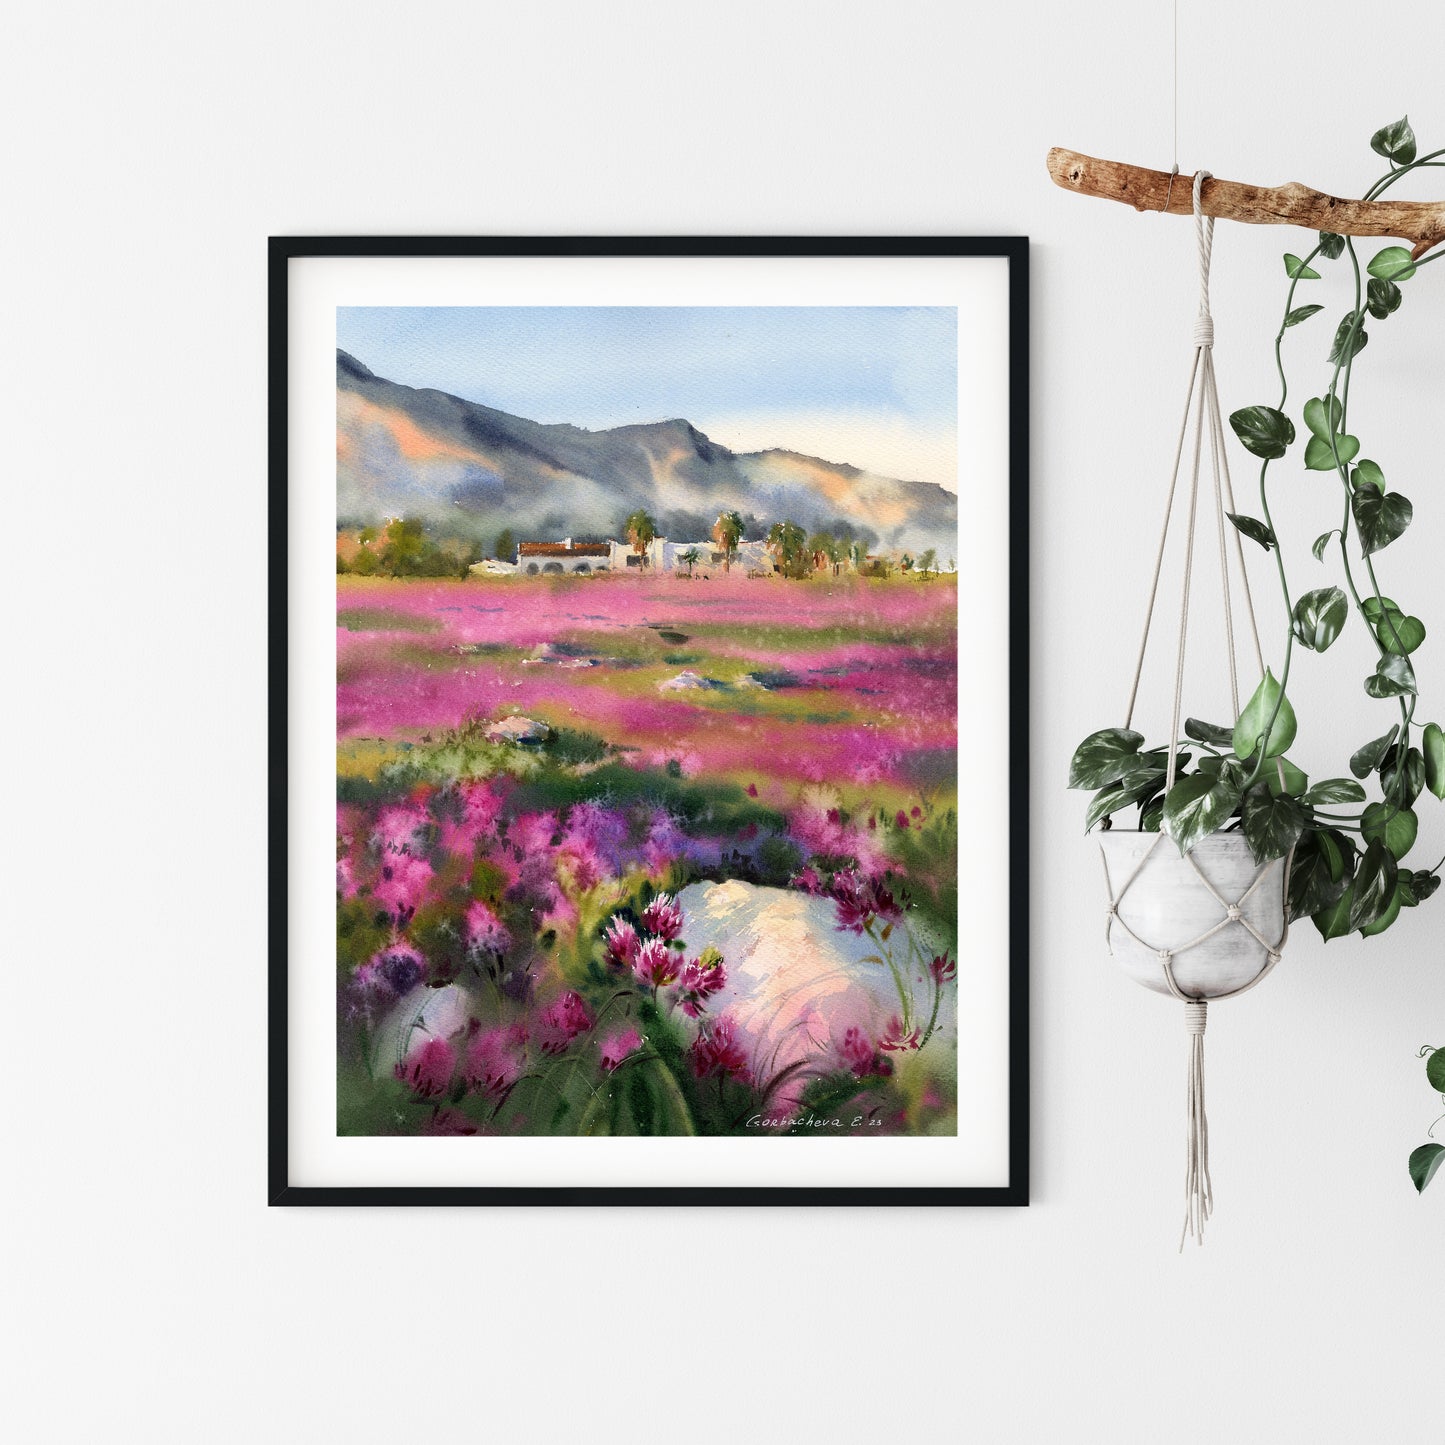 Сolorful Landscape Painting Watercolor Original, Wildflower Wall Art, Nature Artwork, Pink Clover Field